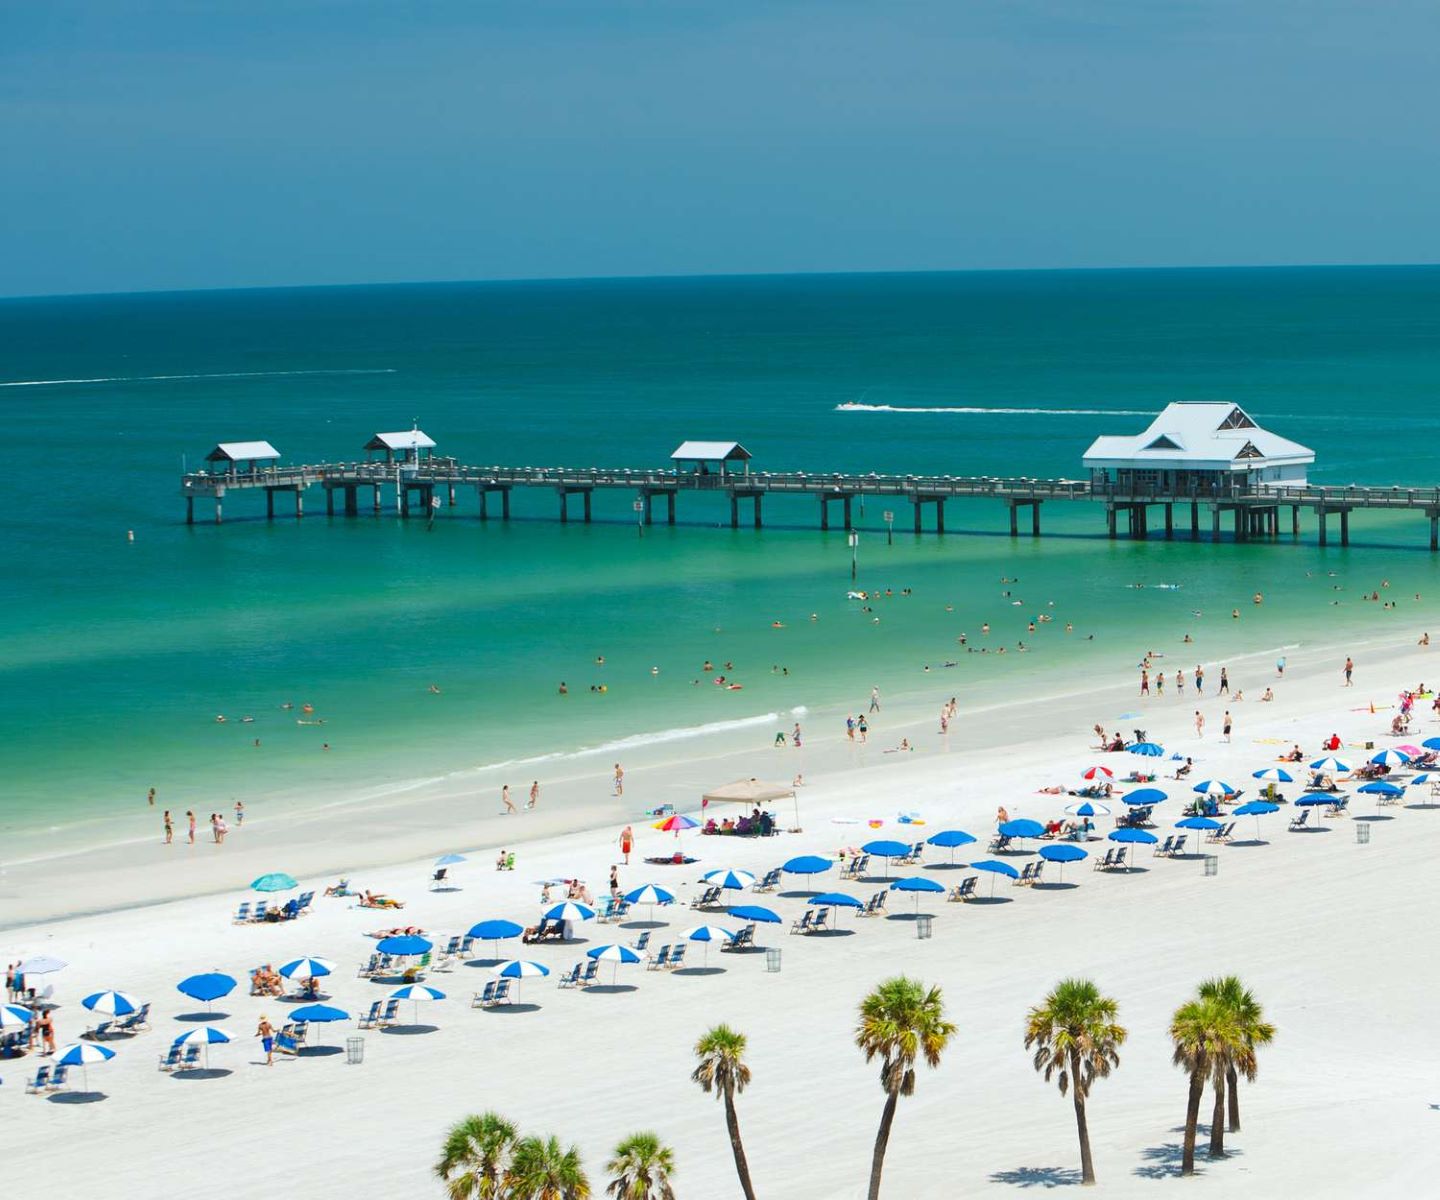 Discover Tampa's Hidden Gem Beaches Away From The Crowds Of Clearwater And St. Pete!